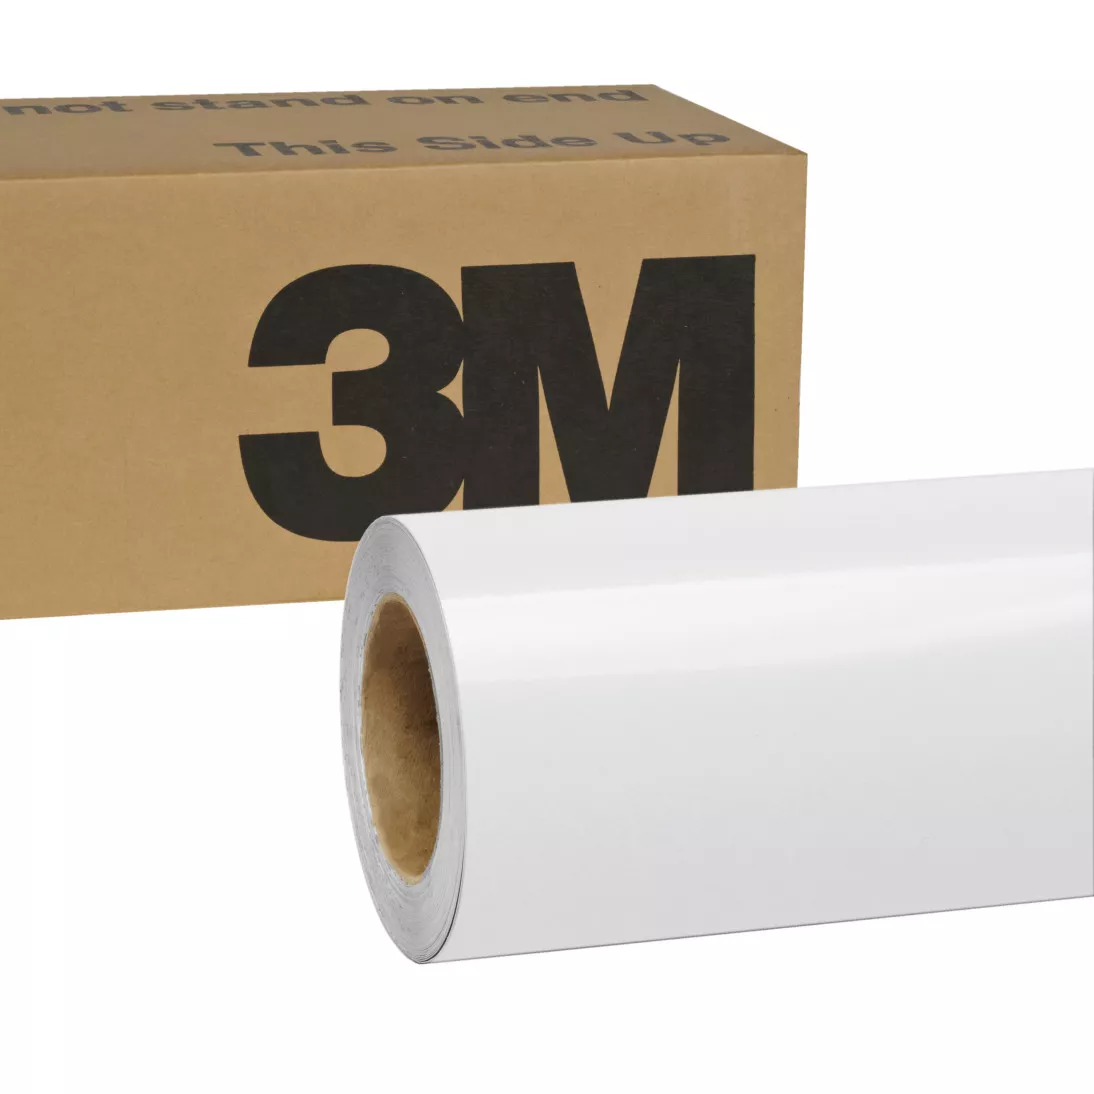 3M™ Wrap Film Series 1080-G247, GlossWhite Gold Sparkle, 60 in x 5 yd